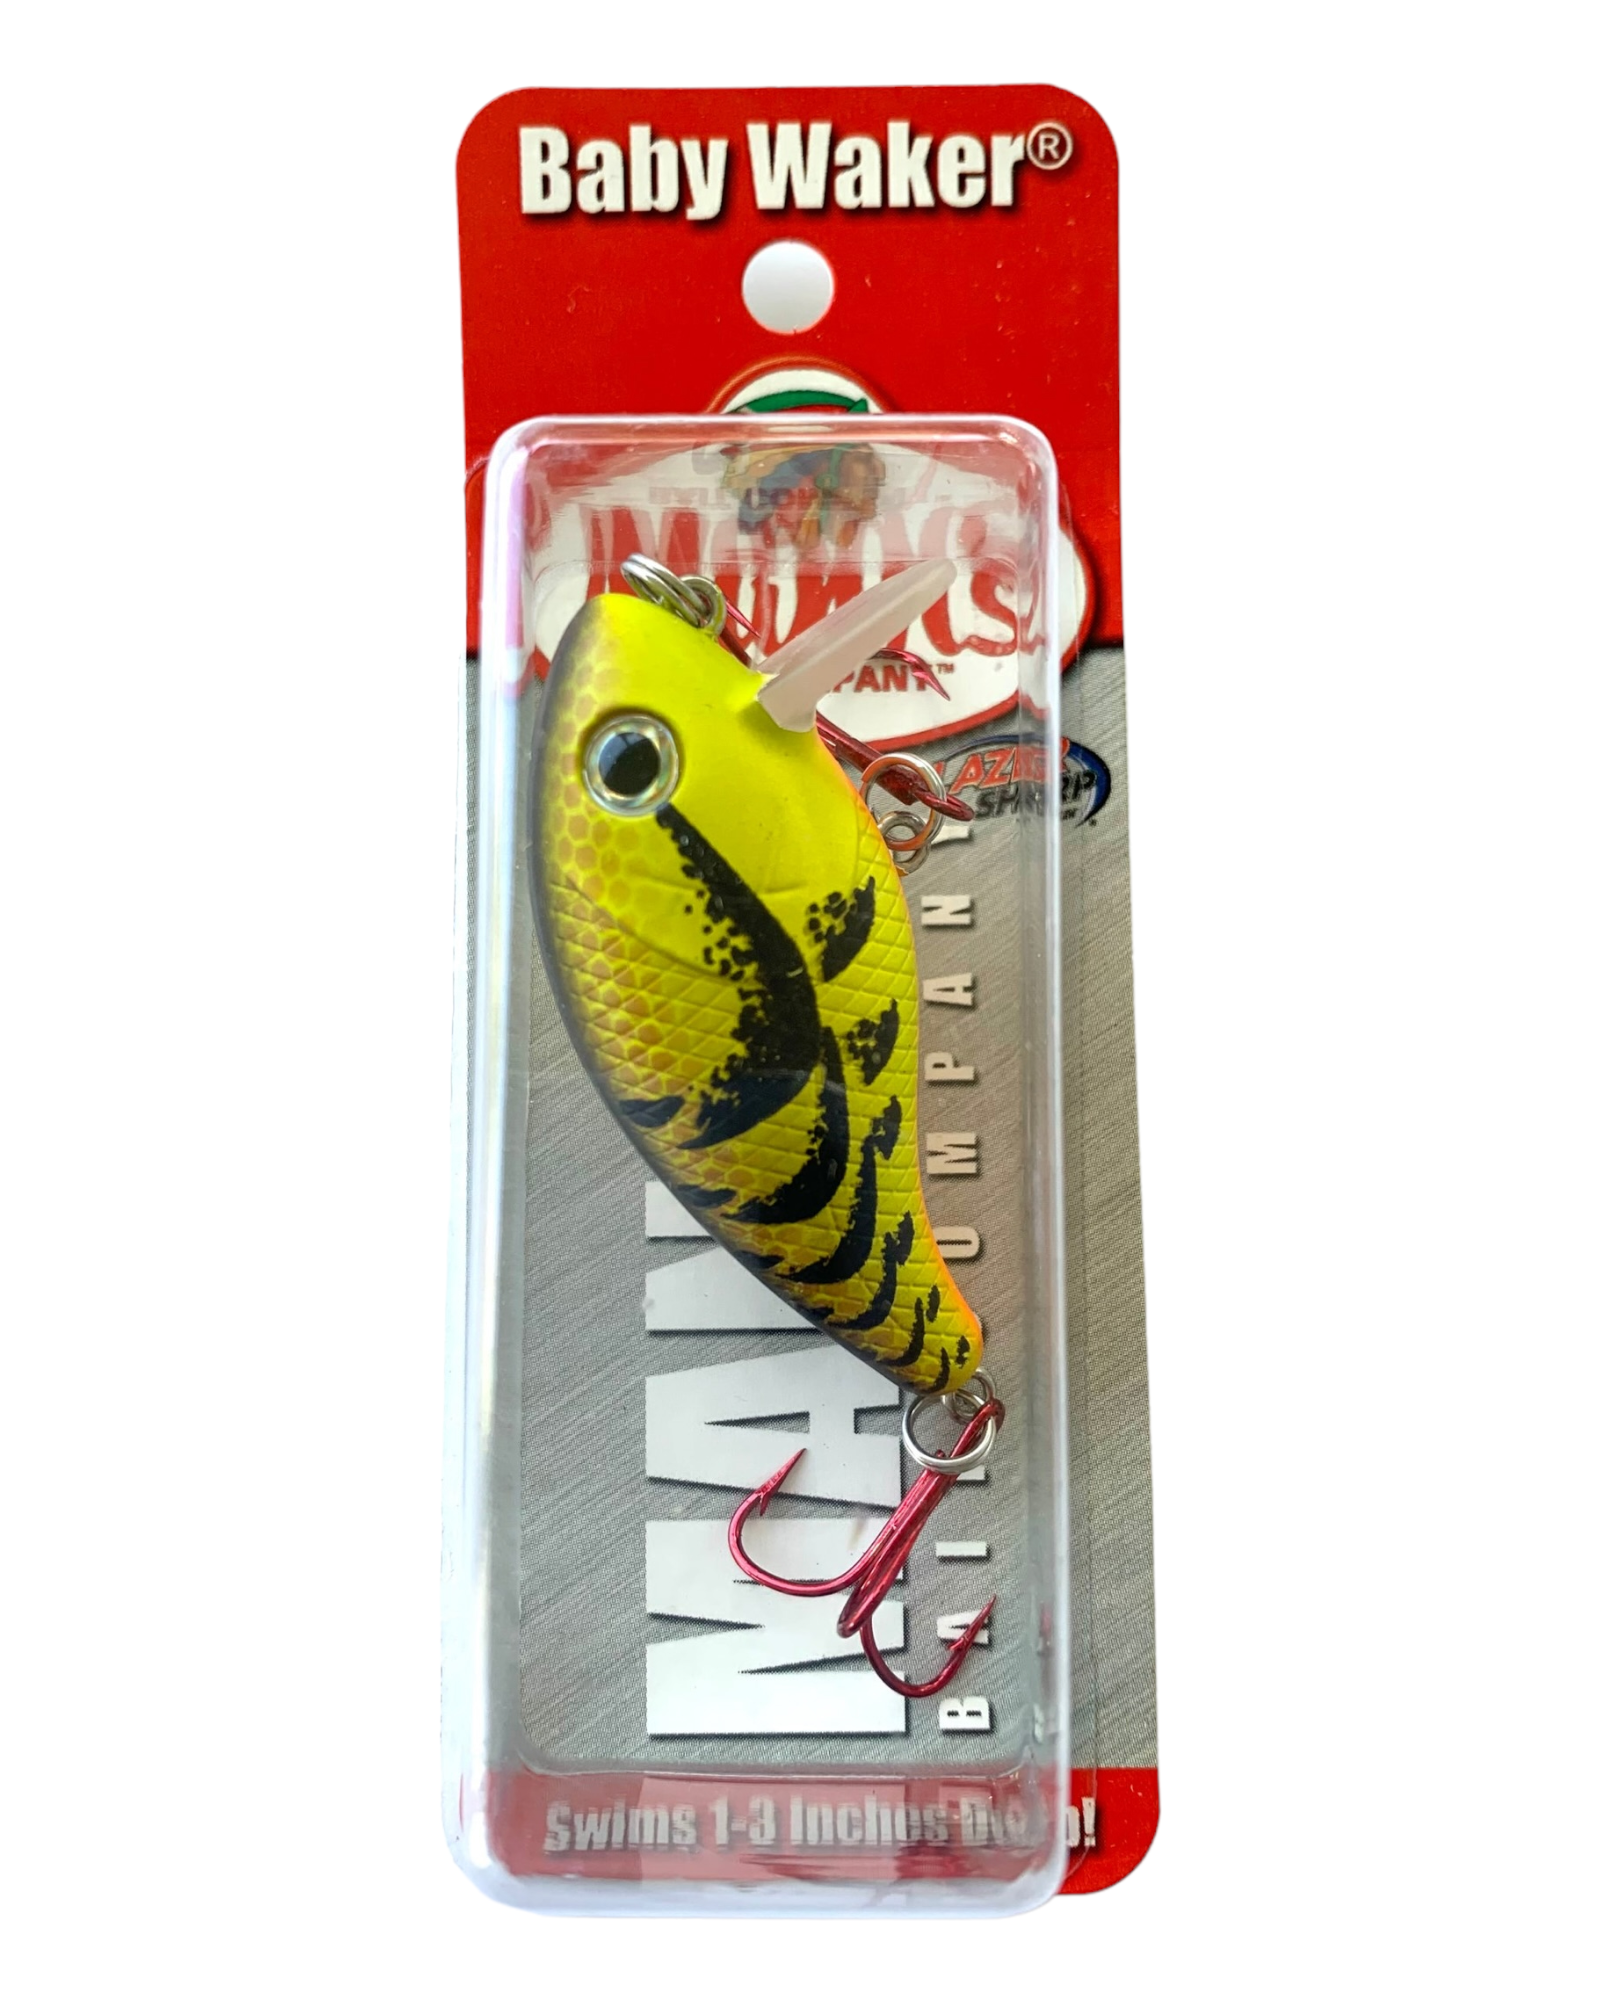 Mann's Bait Company BABY WAKER Fishing Lure • WINTER CRAW – Toad